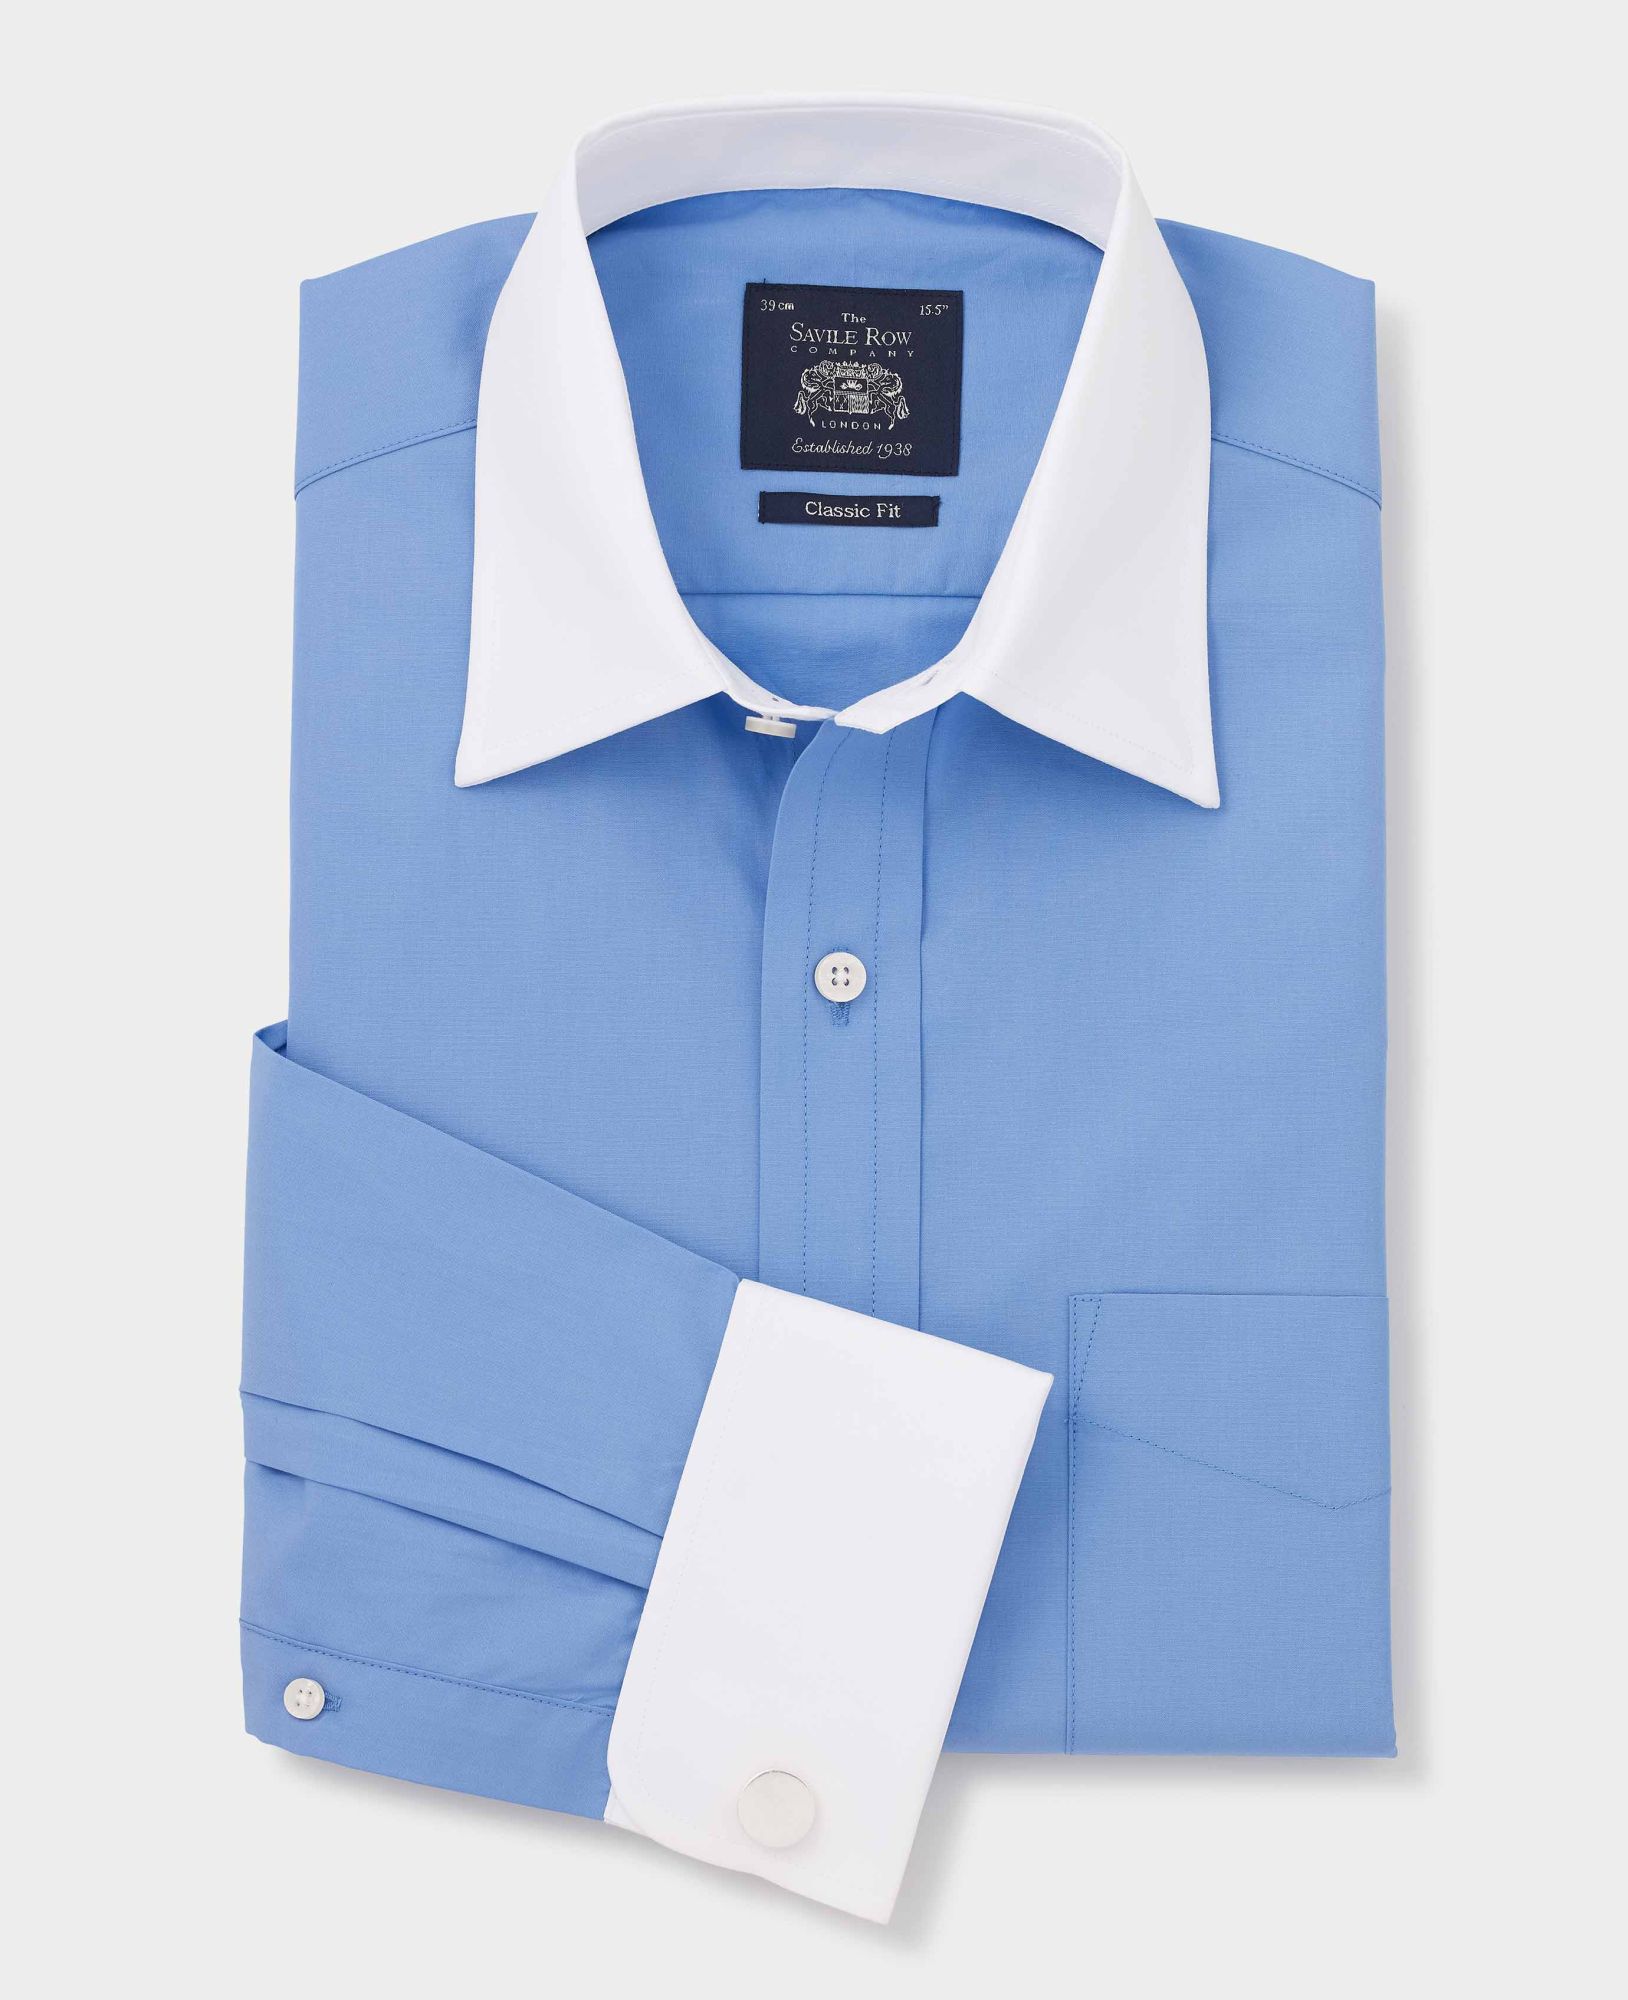 French Blue Classic Fit Shirt With White Collar & Cuffs 16 1/2